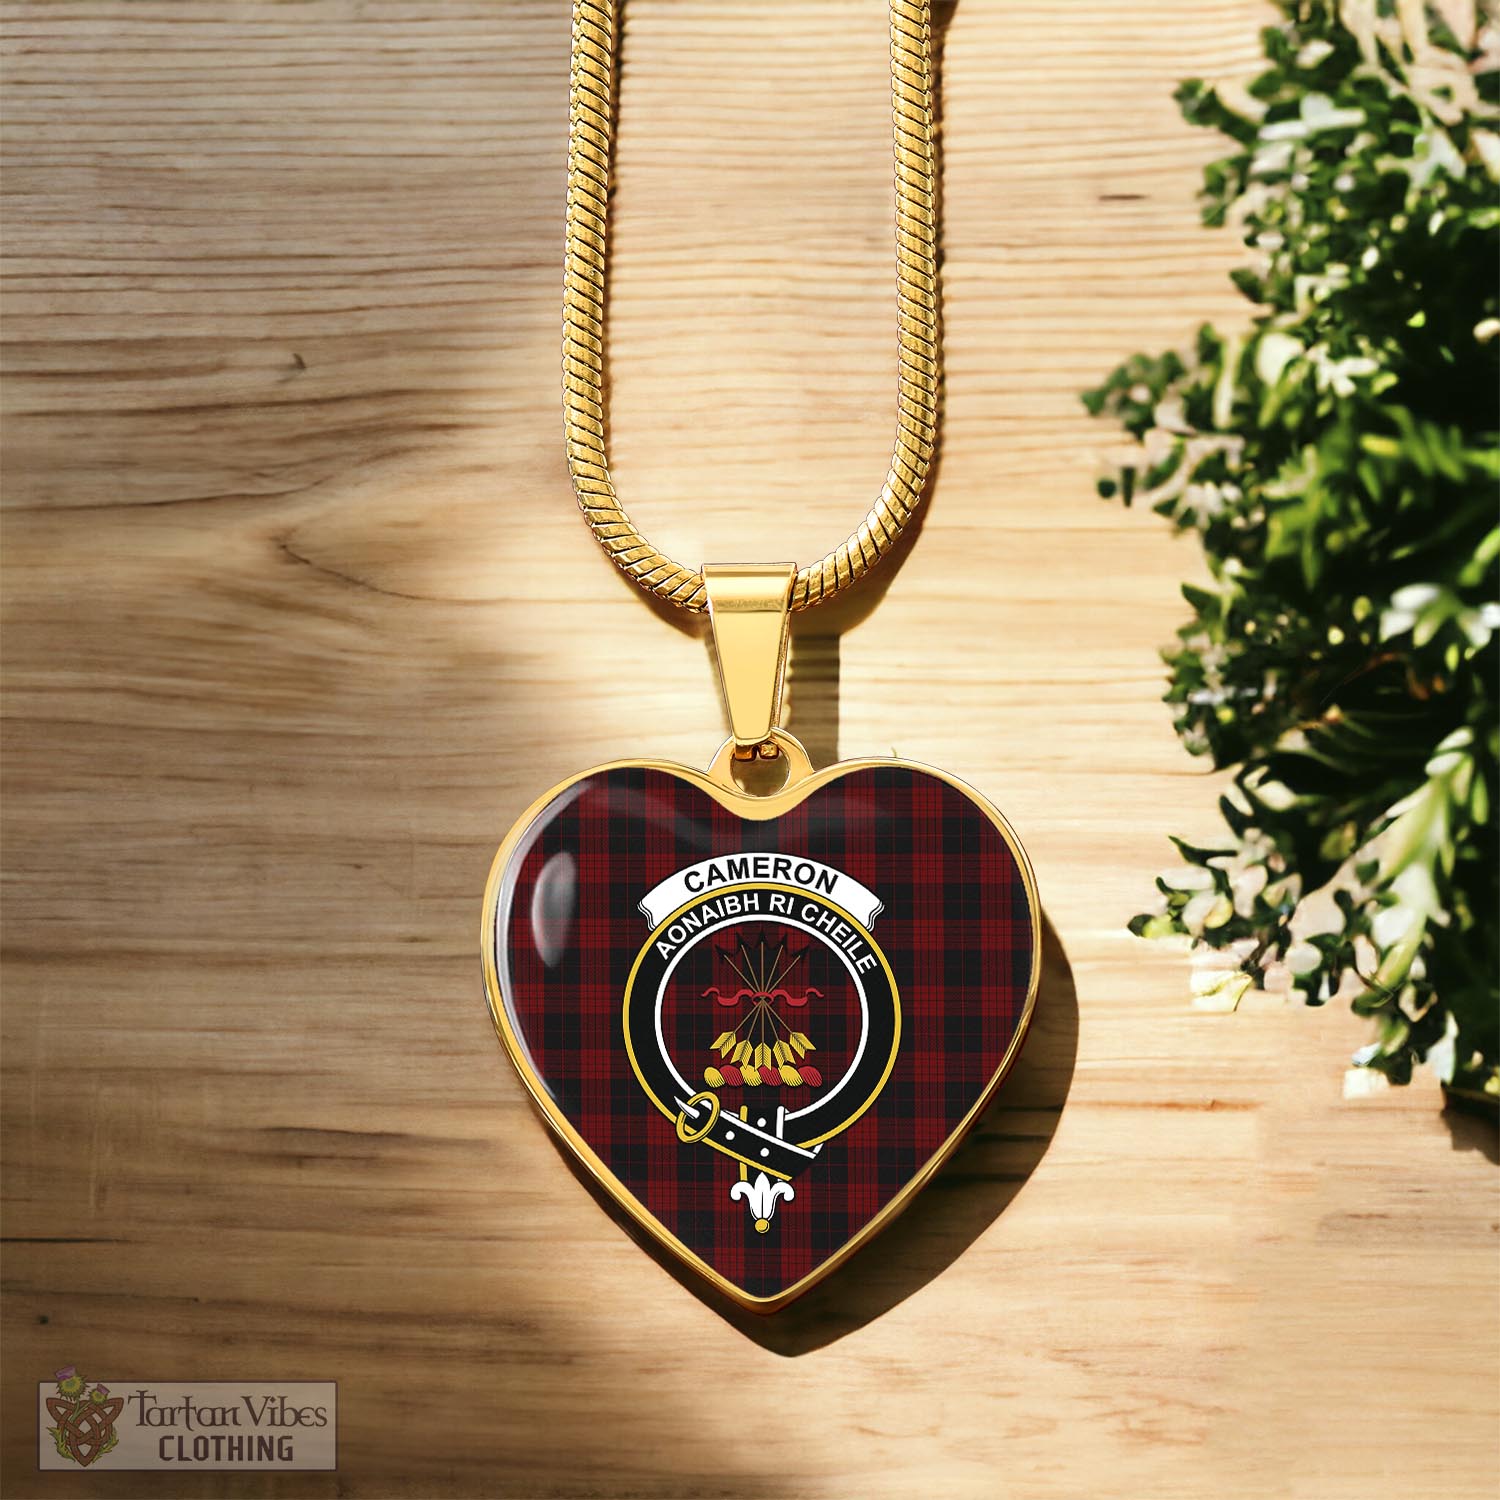 Tartan Vibes Clothing Cameron Black and Red Tartan Heart Necklace with Family Crest